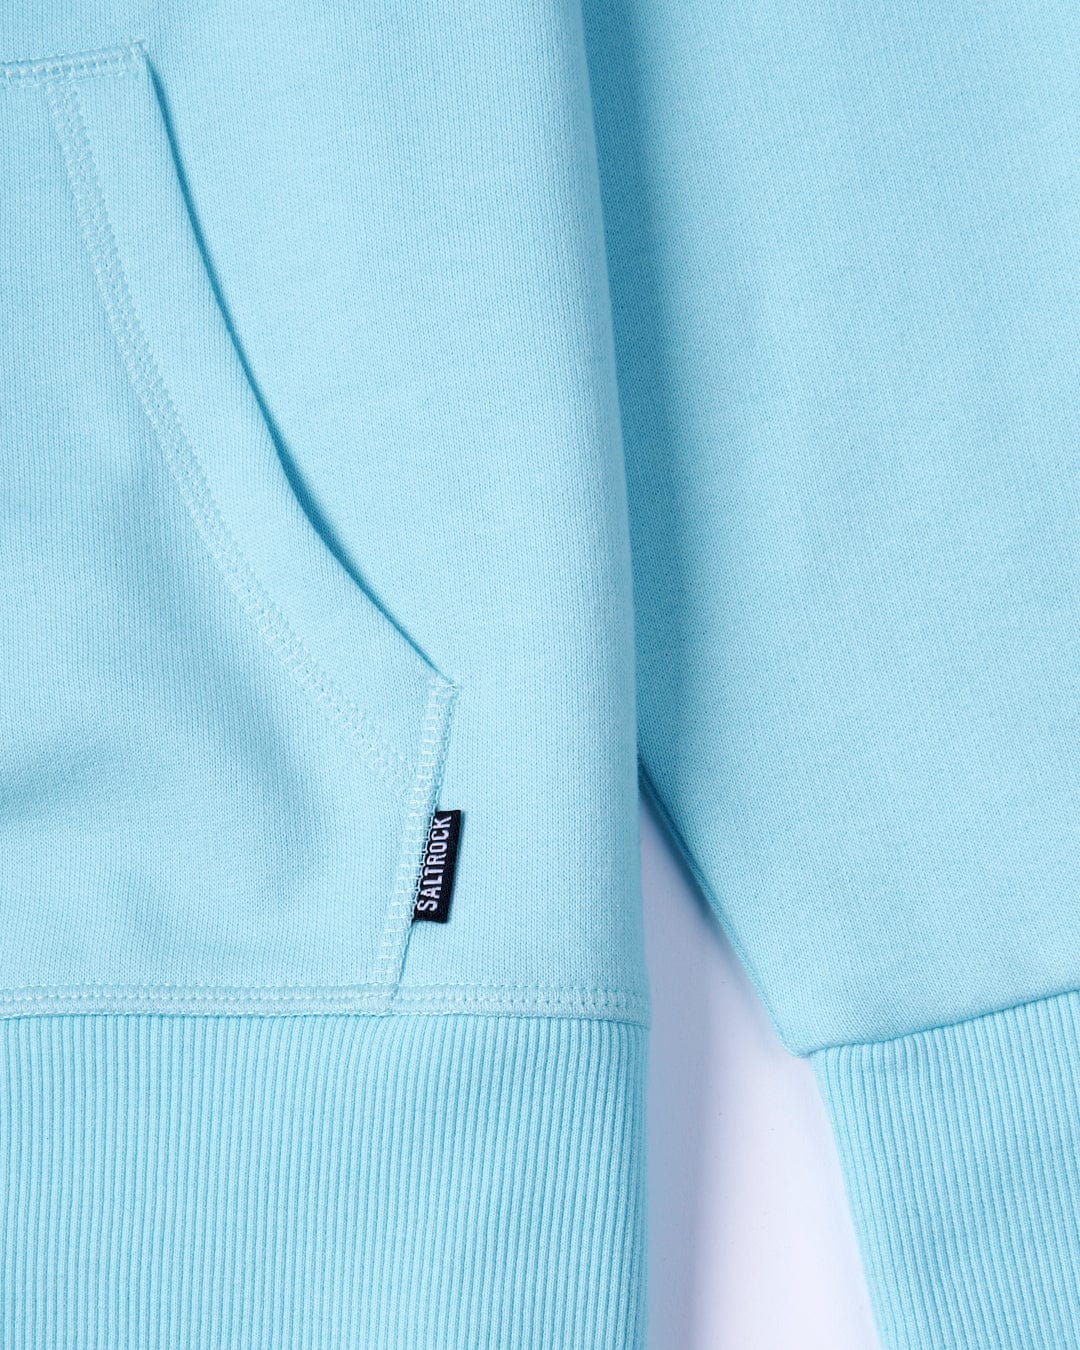 Close-up of a light blue Velator - Womens Pop Hoodie - machine washable fabric with a visible Saltrock branding label on the seam.